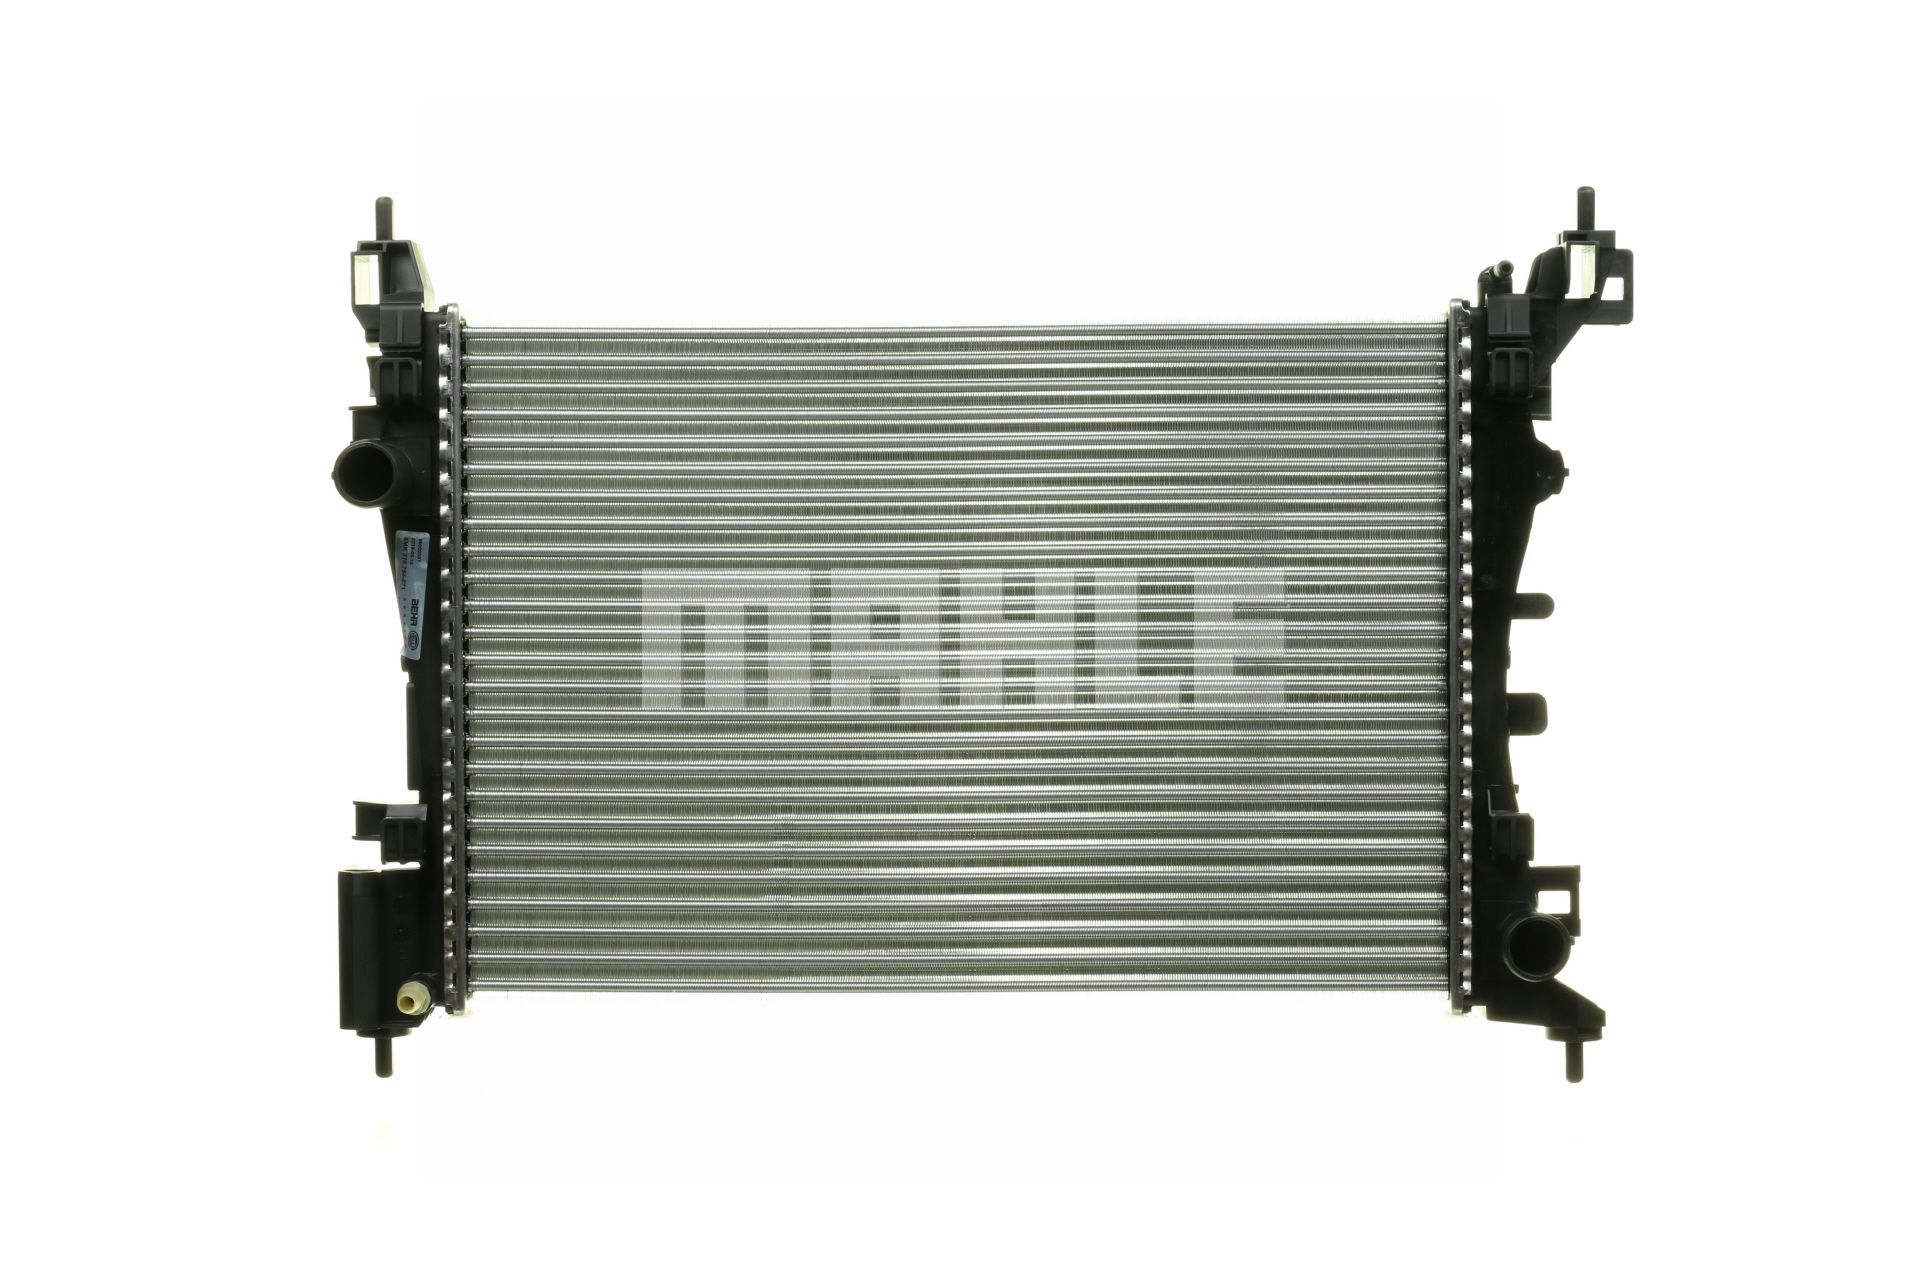 376754571 MAHLE ORIGINAL 540 x 375 x 26 mm, Manual Transmission, Mechanically jointed cooling fins Radiator CR 1121 000P buy